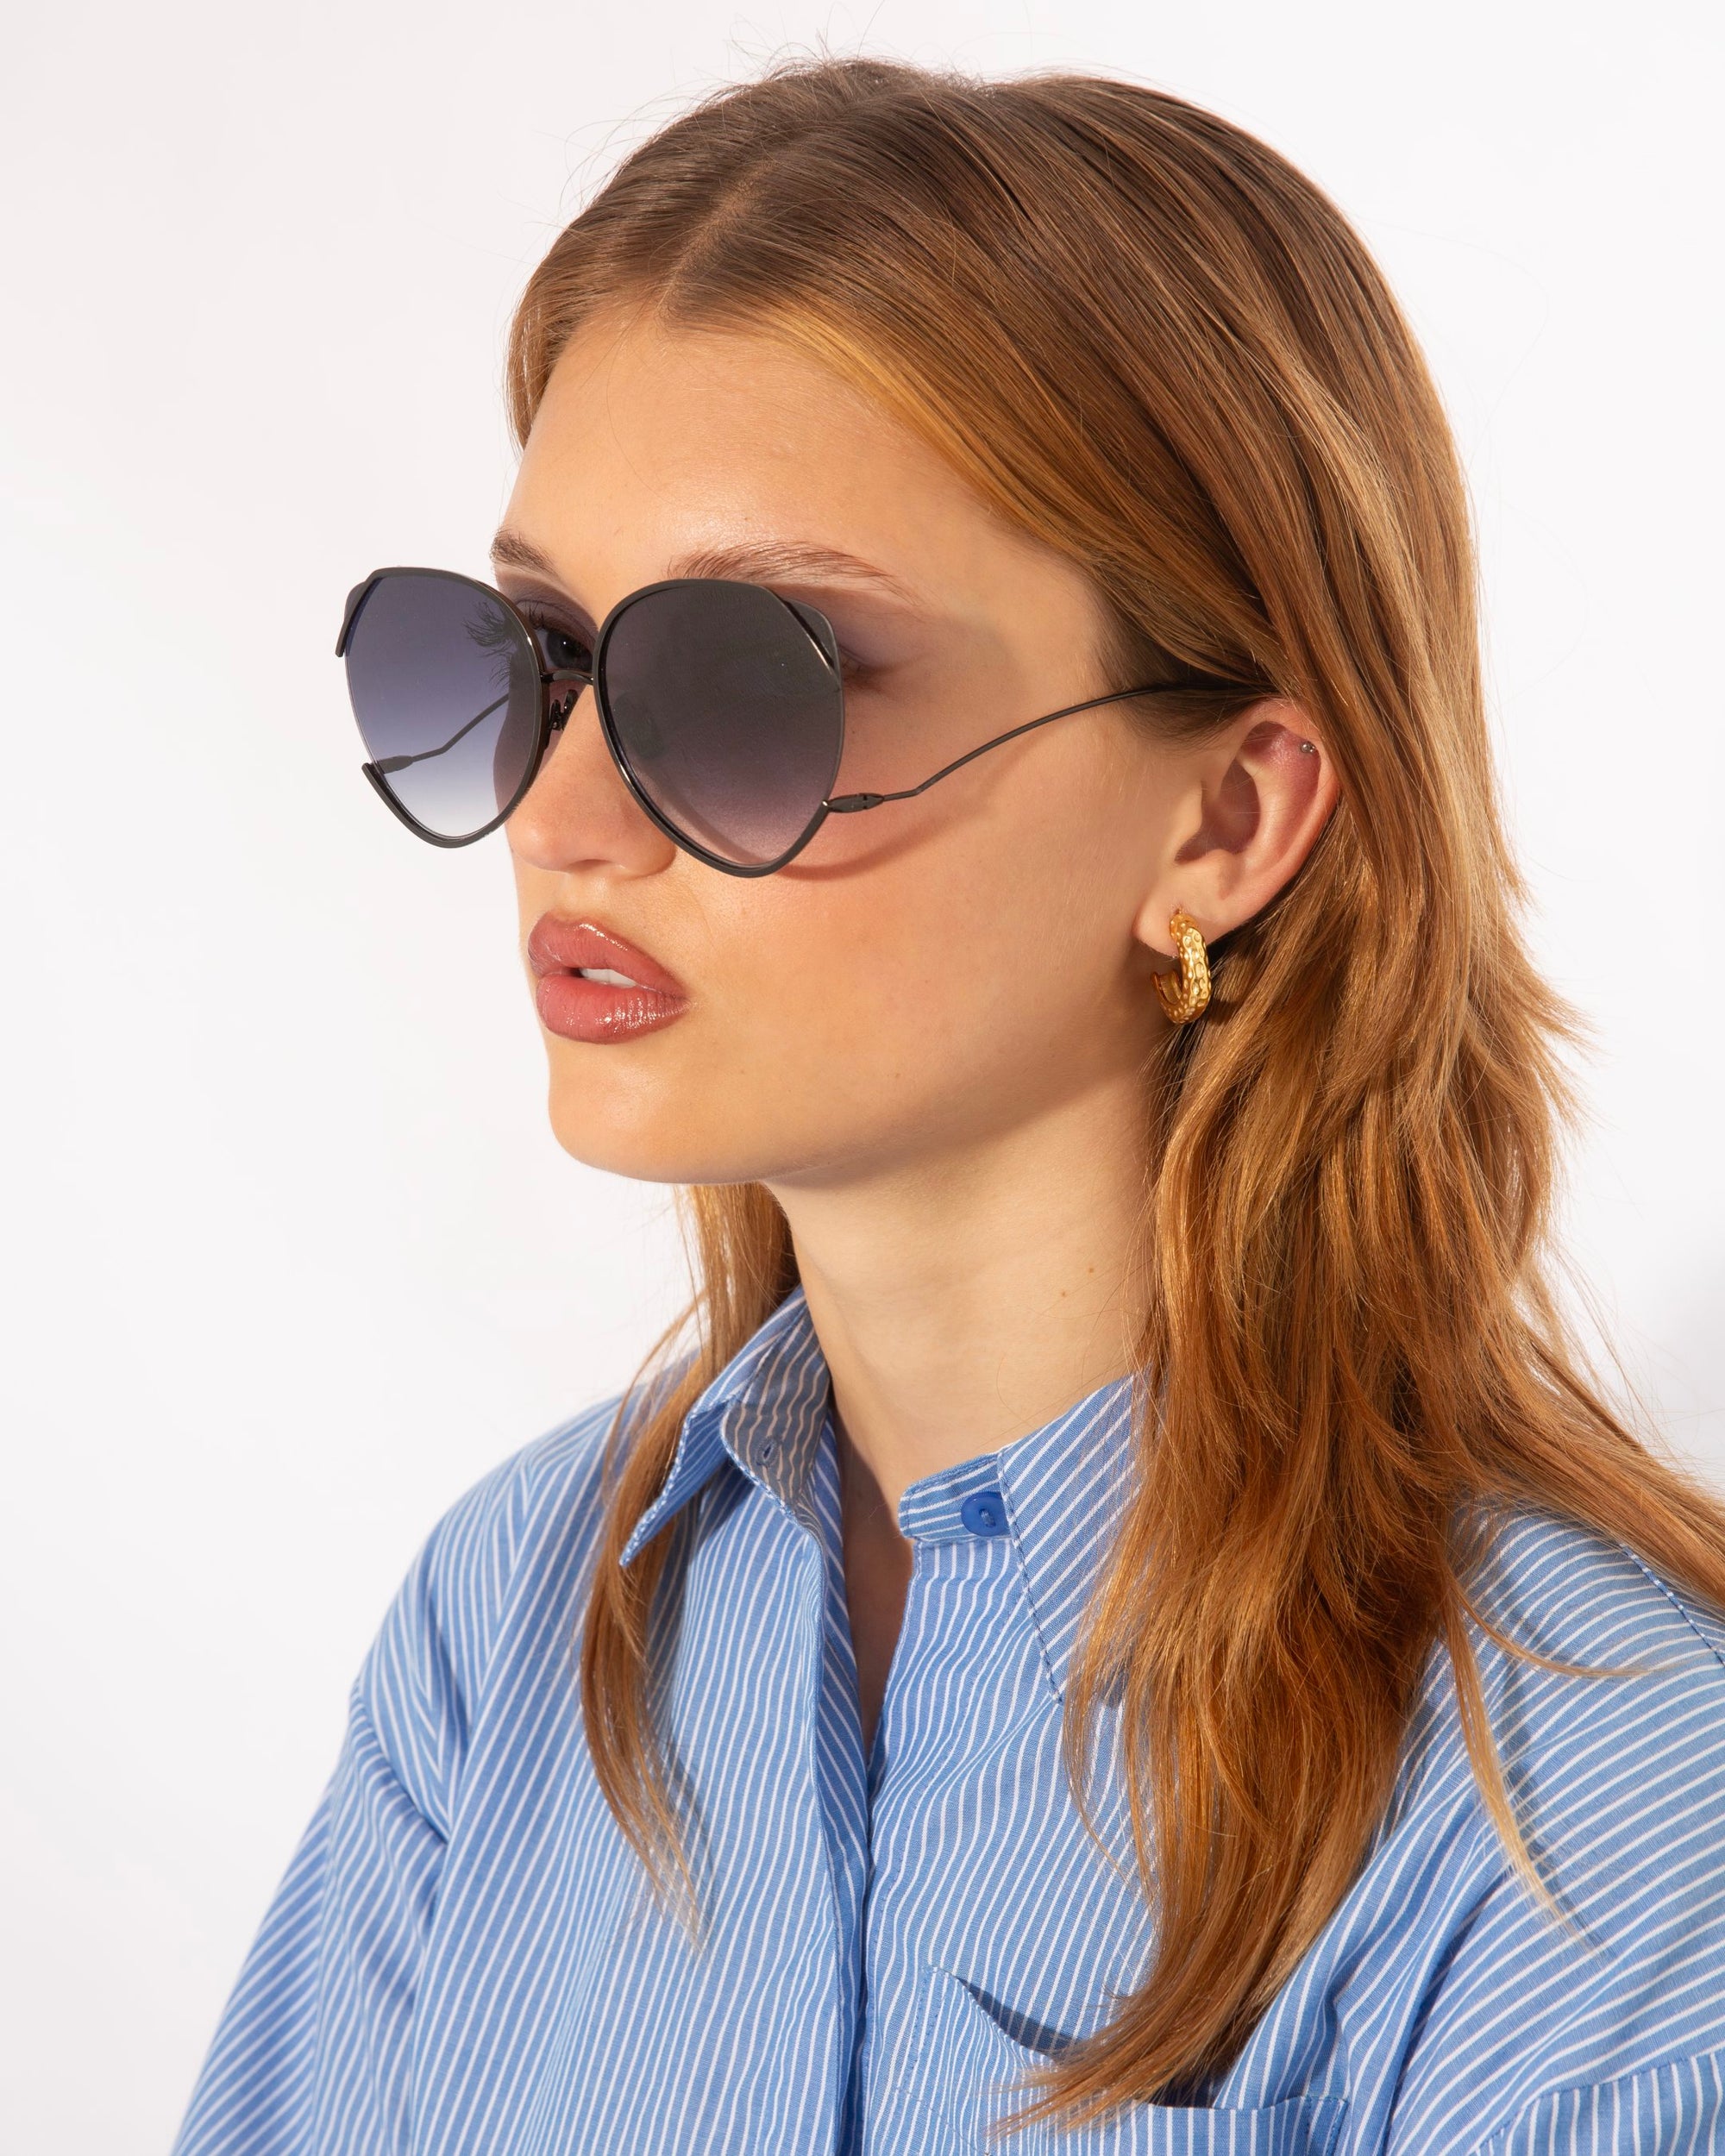 A person with long, straight, reddish hair is wearing oversized For Art&#39;s Sake® Wonderland sunglasses with 100% UV protection and a blue and white striped shirt. They also have gold hoop earrings and a serious expression, standing against a plain, white background.